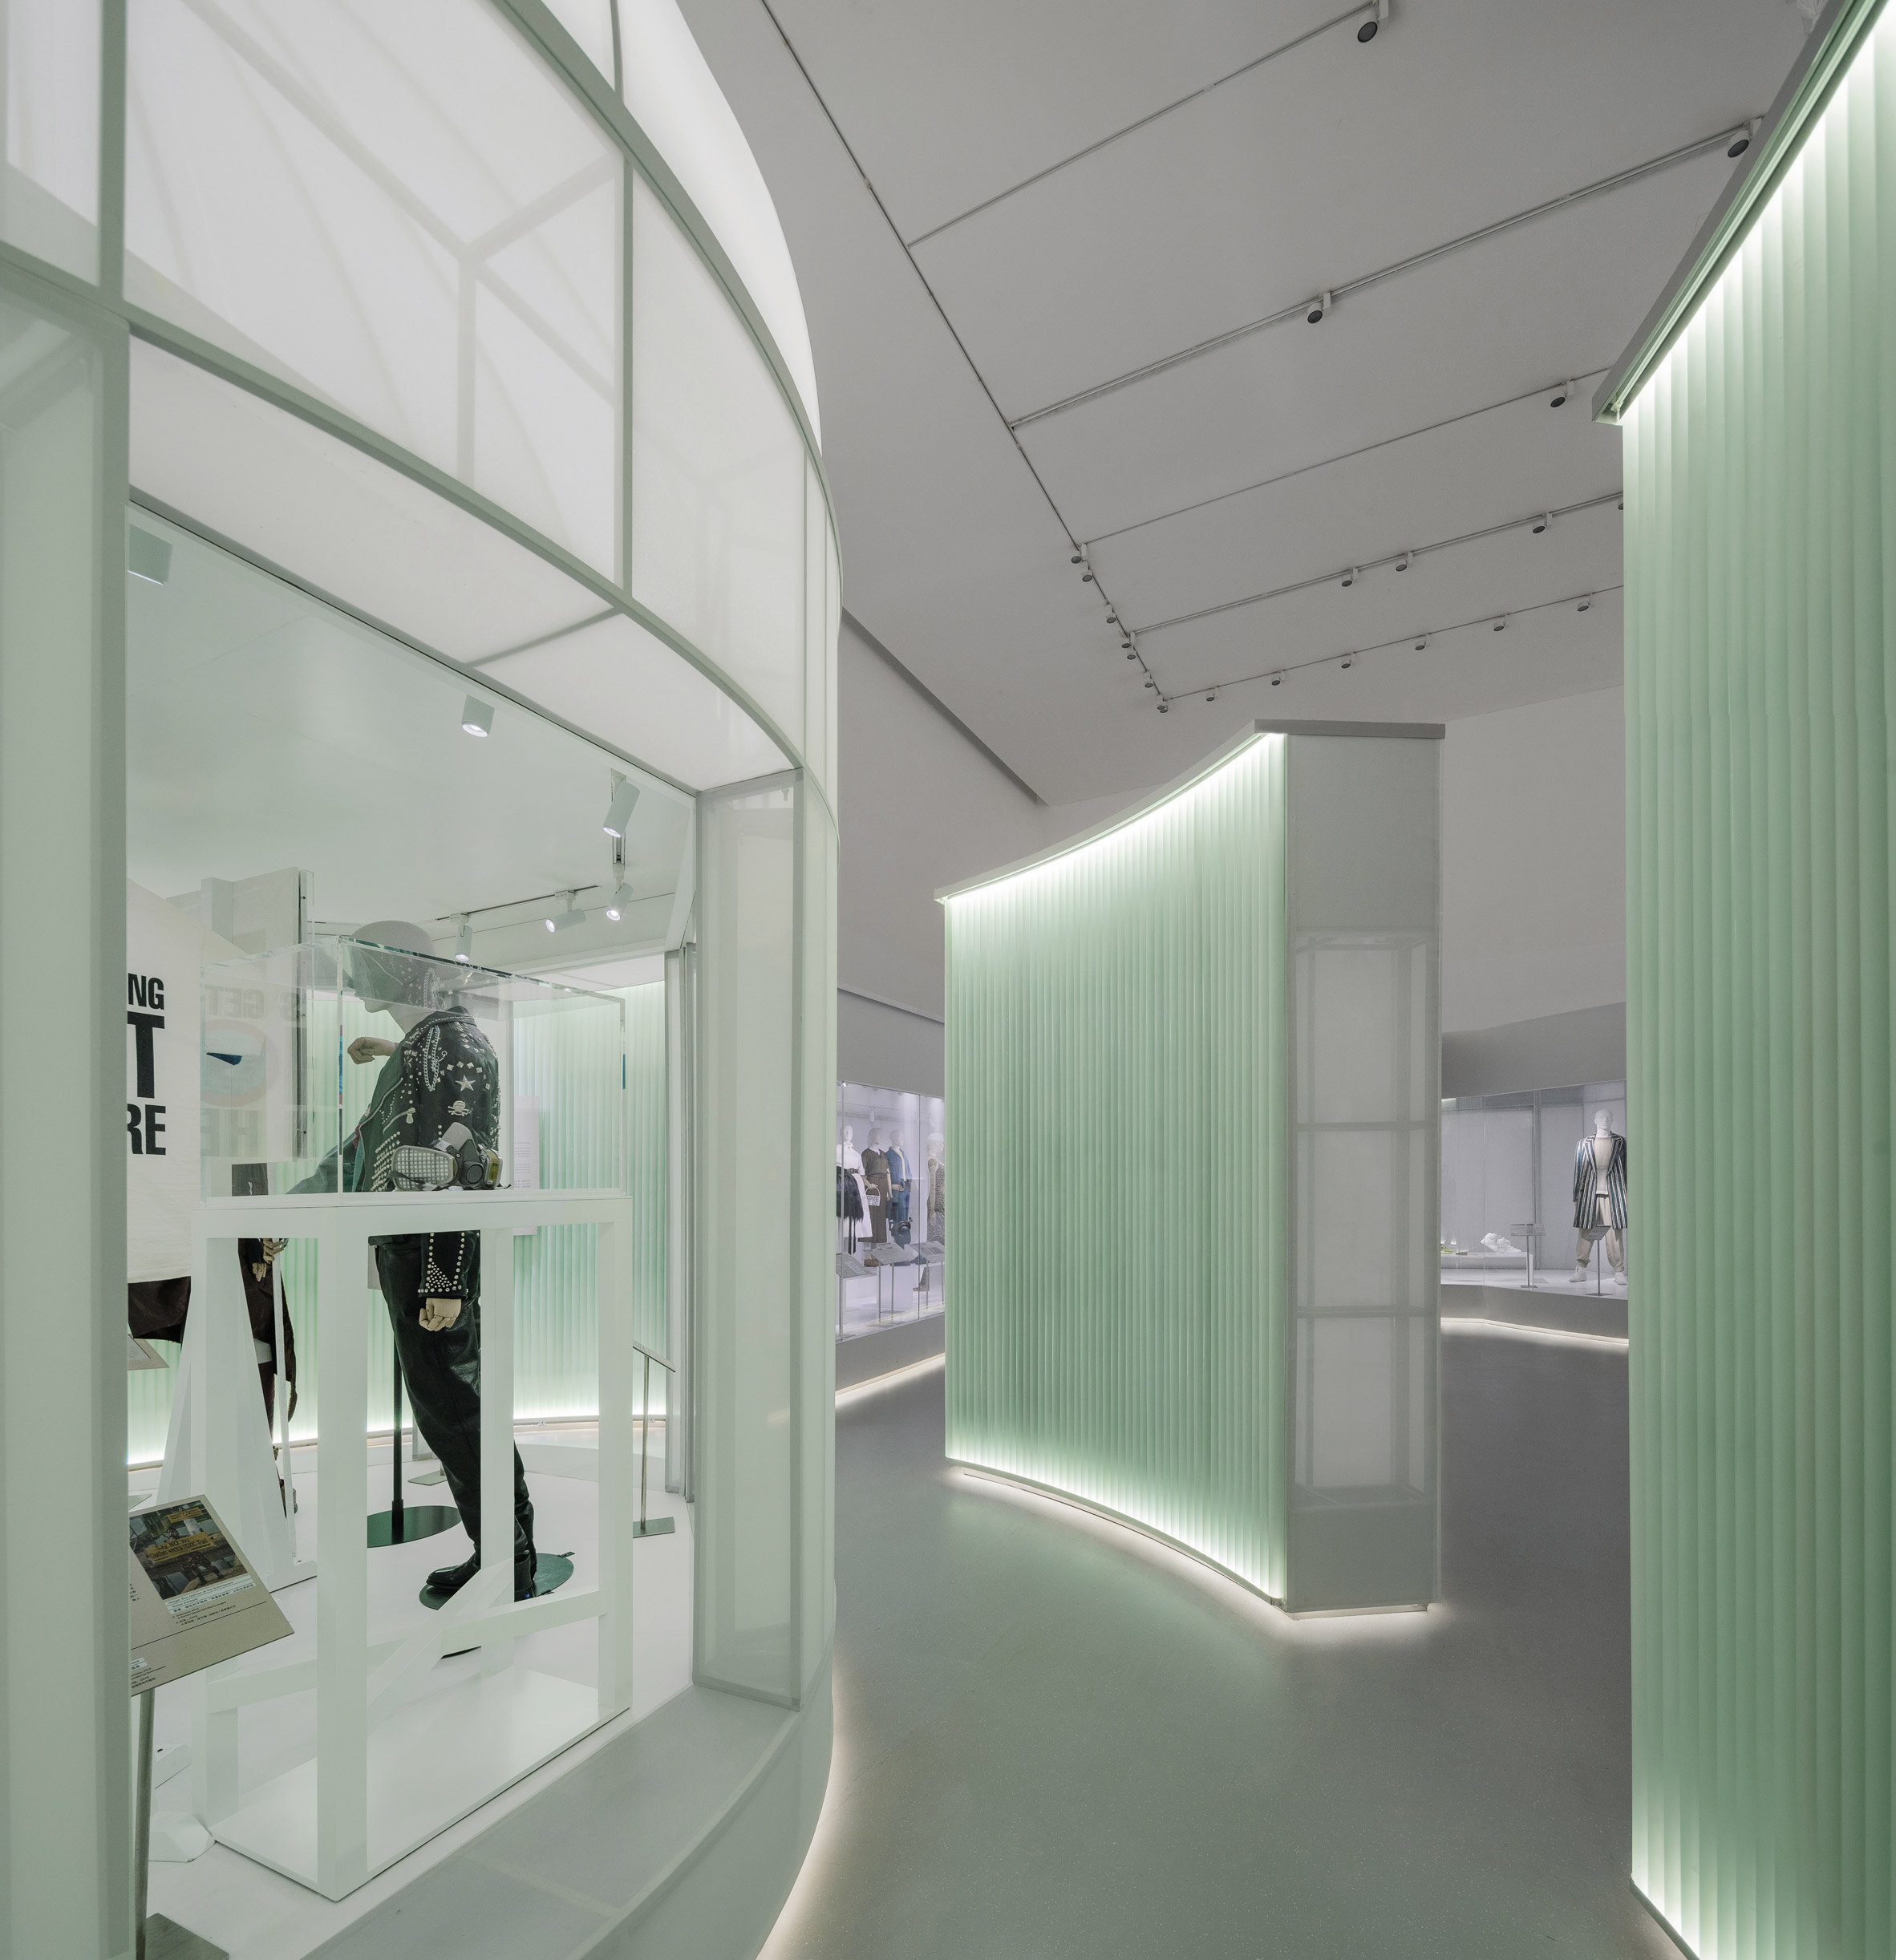 Acrylic pipes form a wall around the display cases by Studio 10